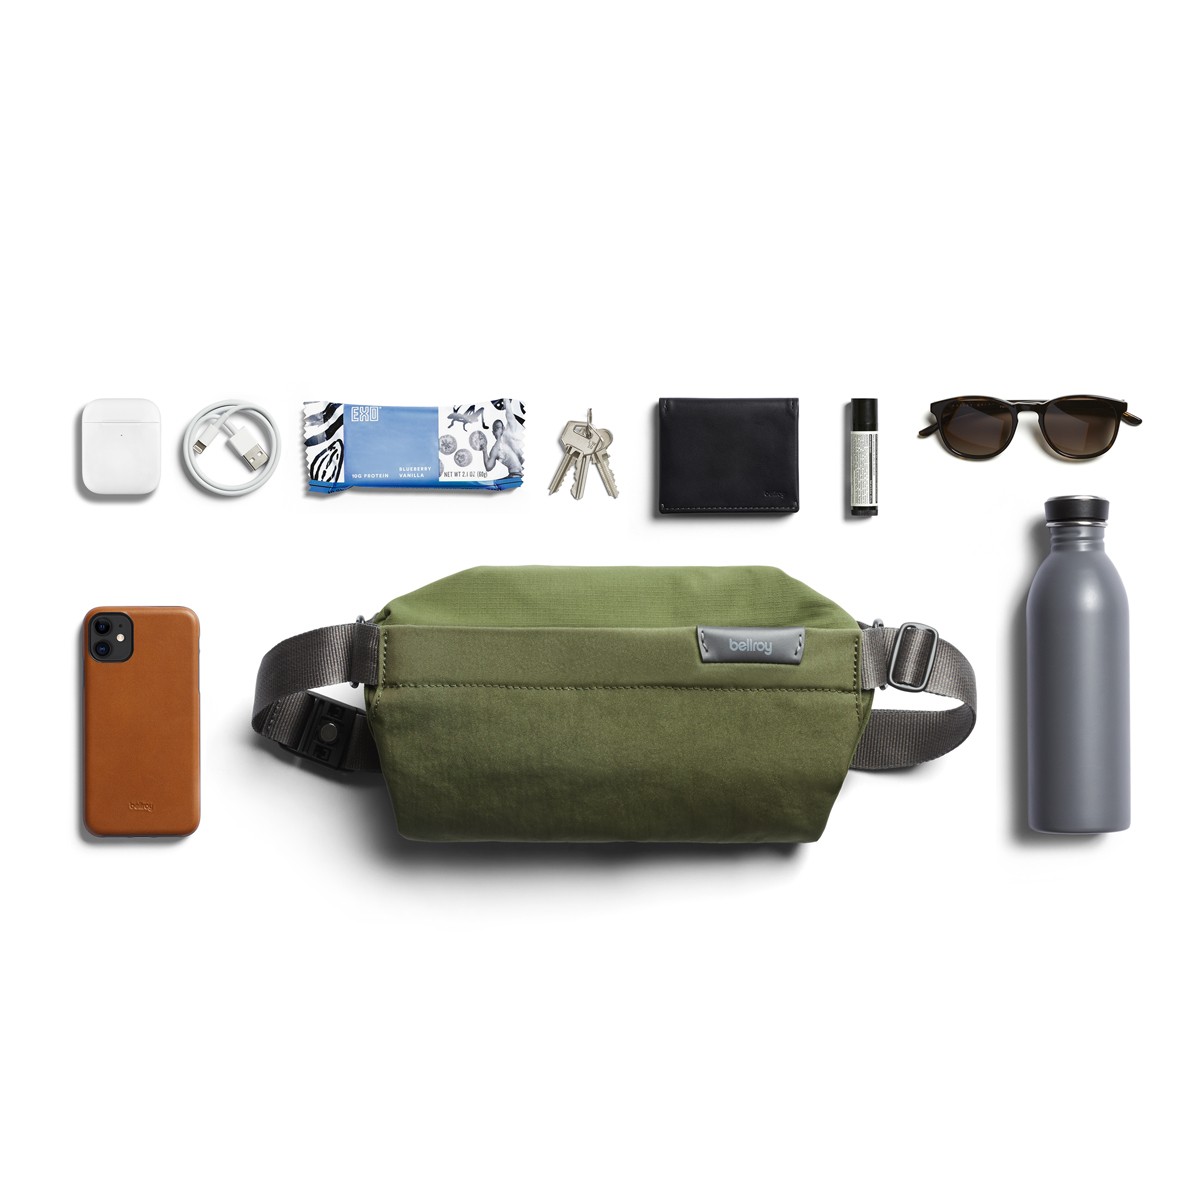 Bellroy Sling Bag Compact Crossbody Bag, Multiple Compartments, Water-resistant Materials, Holds Phone, Camera & Water Bottle Marine Blue 